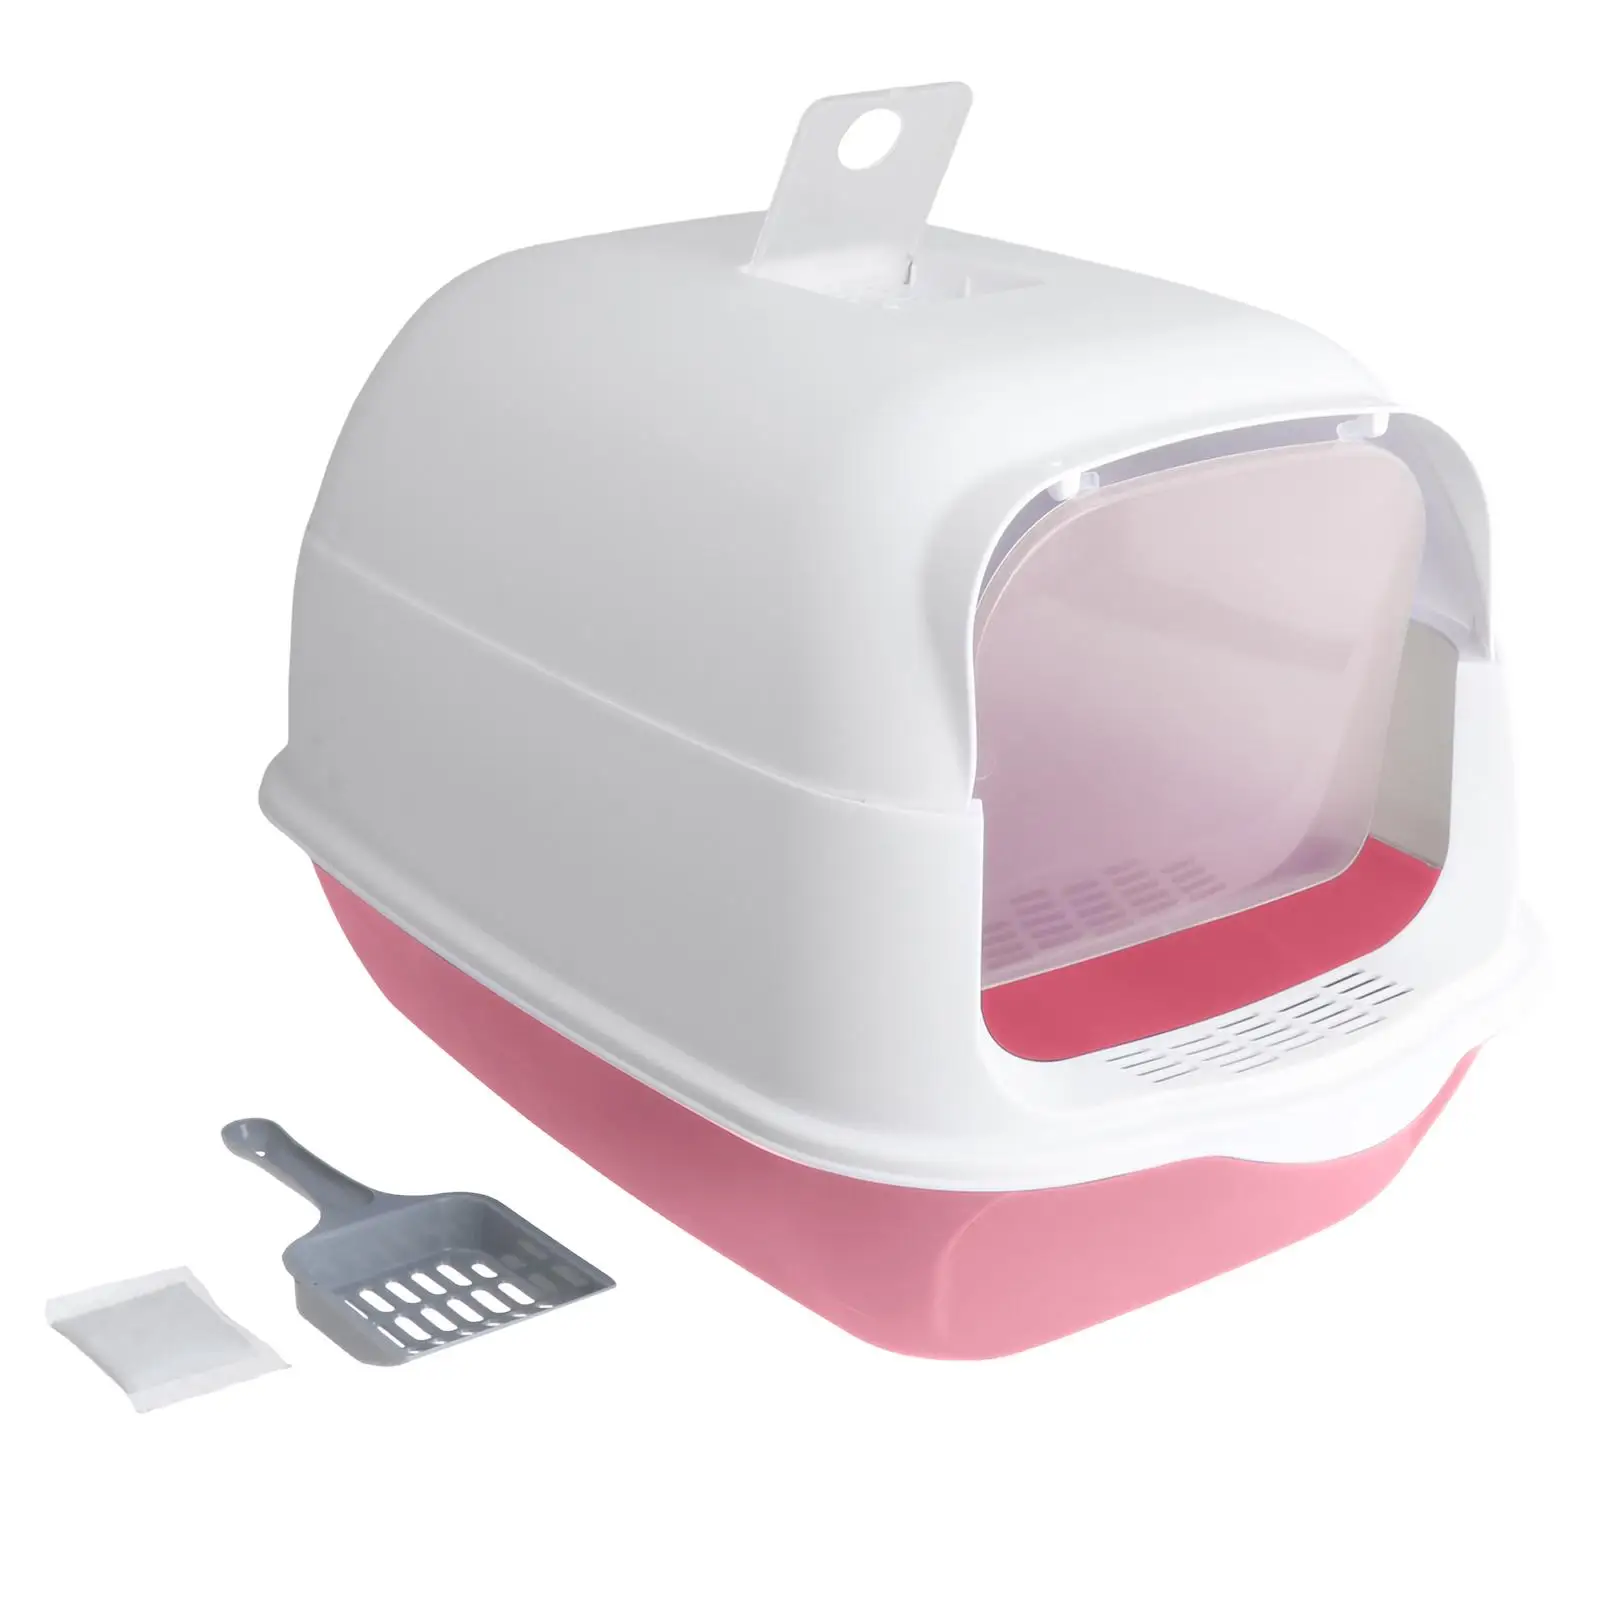 Hooded Cat Litter Box Fully Enclosed Cat Toilet Cat Litter Tray Large Cat Litter Box High Edge Easy to Clean Kitten Potty